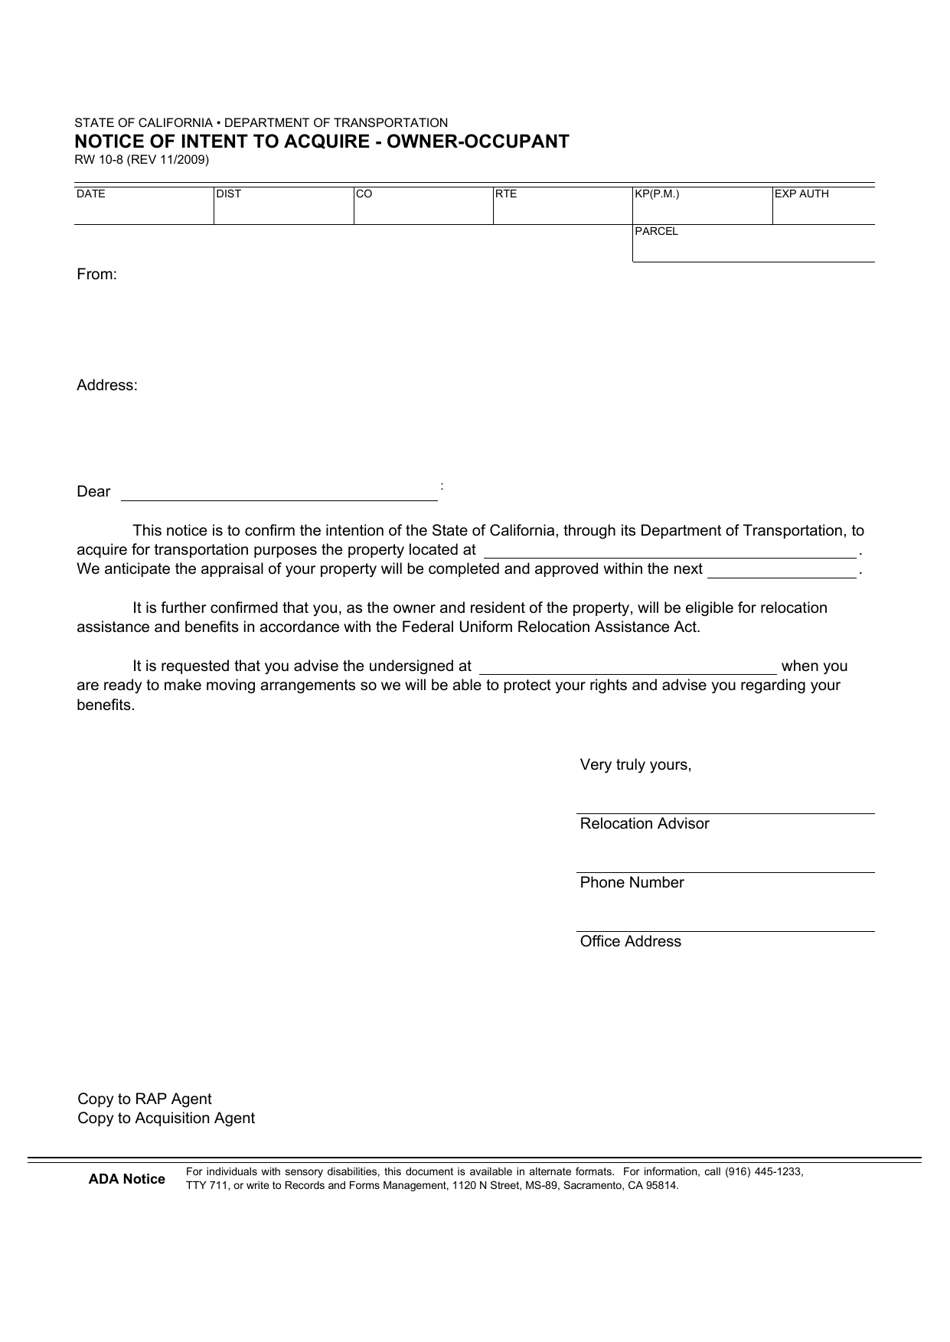 Form RW10-8 Notice of Intent to Acquire - Owner-Occupant - California, Page 1